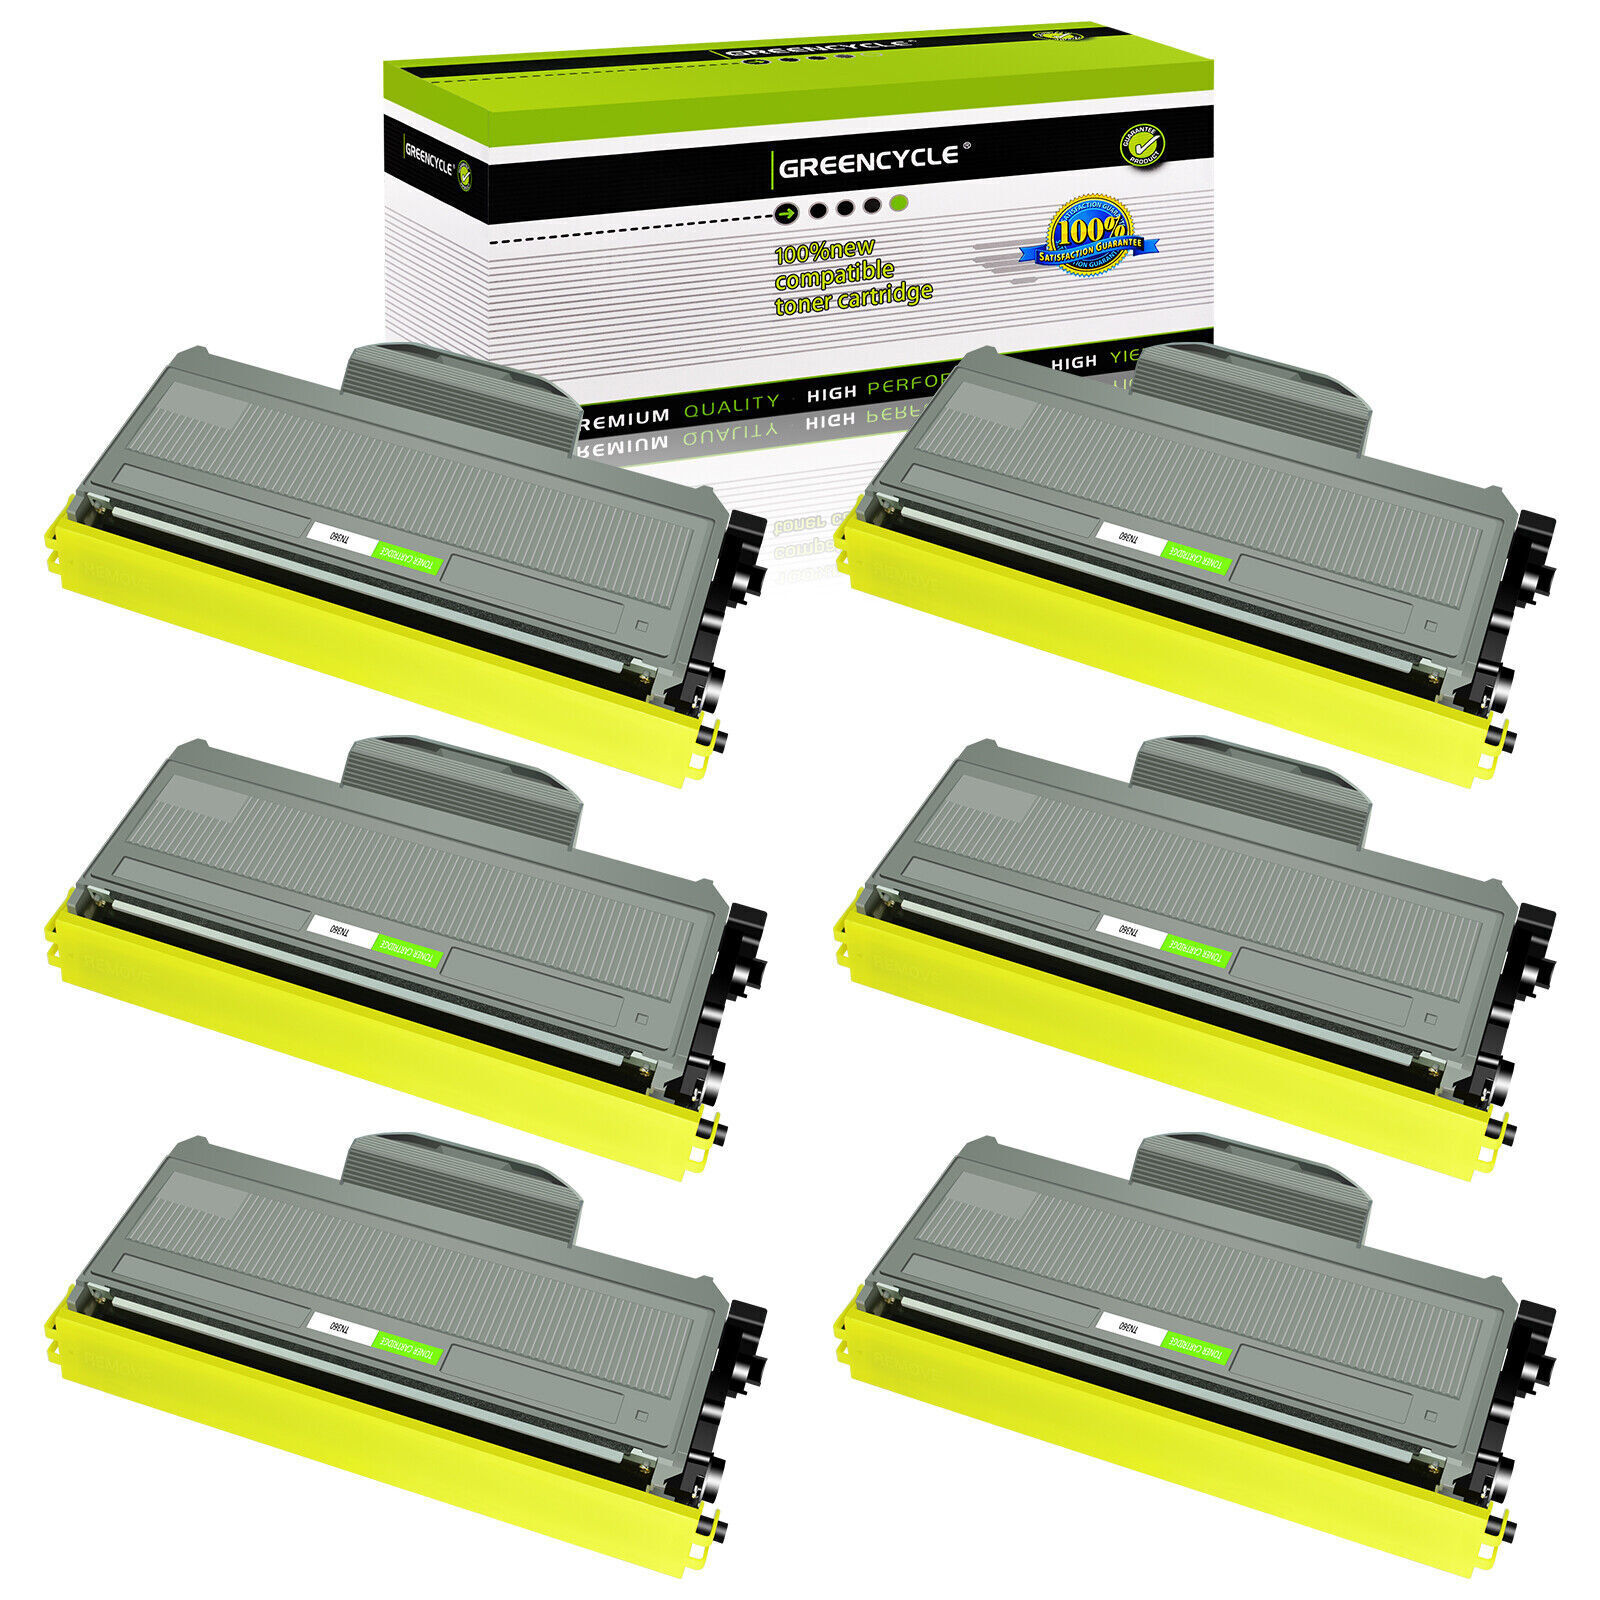 6 Pk TN360 Toner Cartridge for Brother DCP-7045 MFC-7320 MFC-7320R MFC-7440N/NR